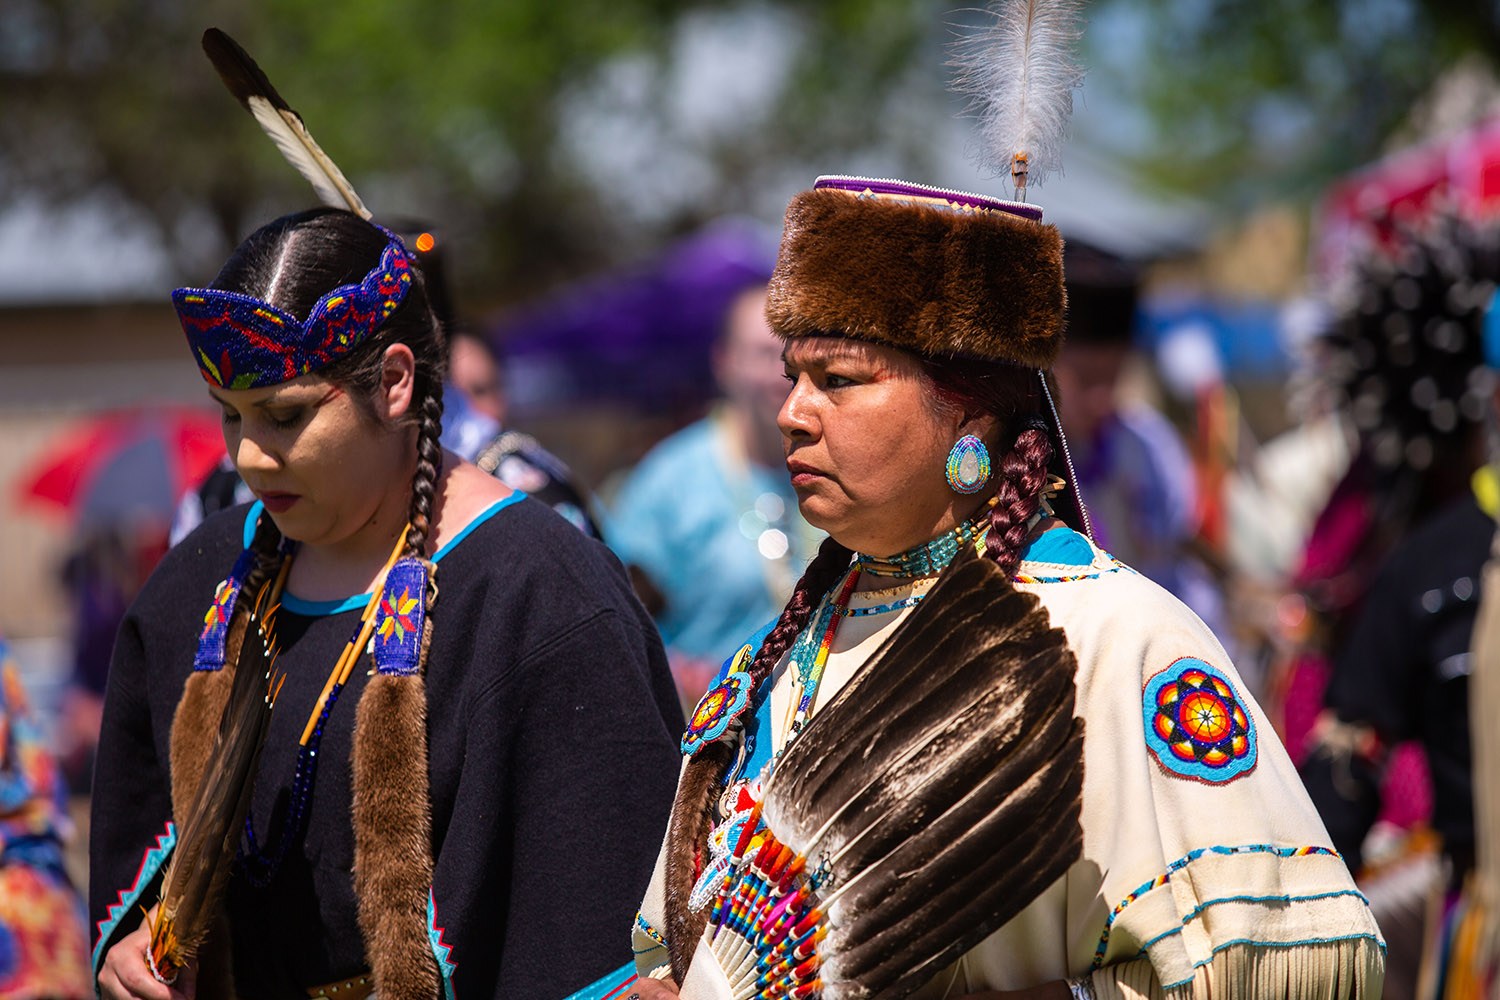 Dozens attended a Native American Fiesta Pow Wow at Mission County Park #2, San Antonio, Texas. Photo by Kaylee Greenlee Beal | Heron contributor